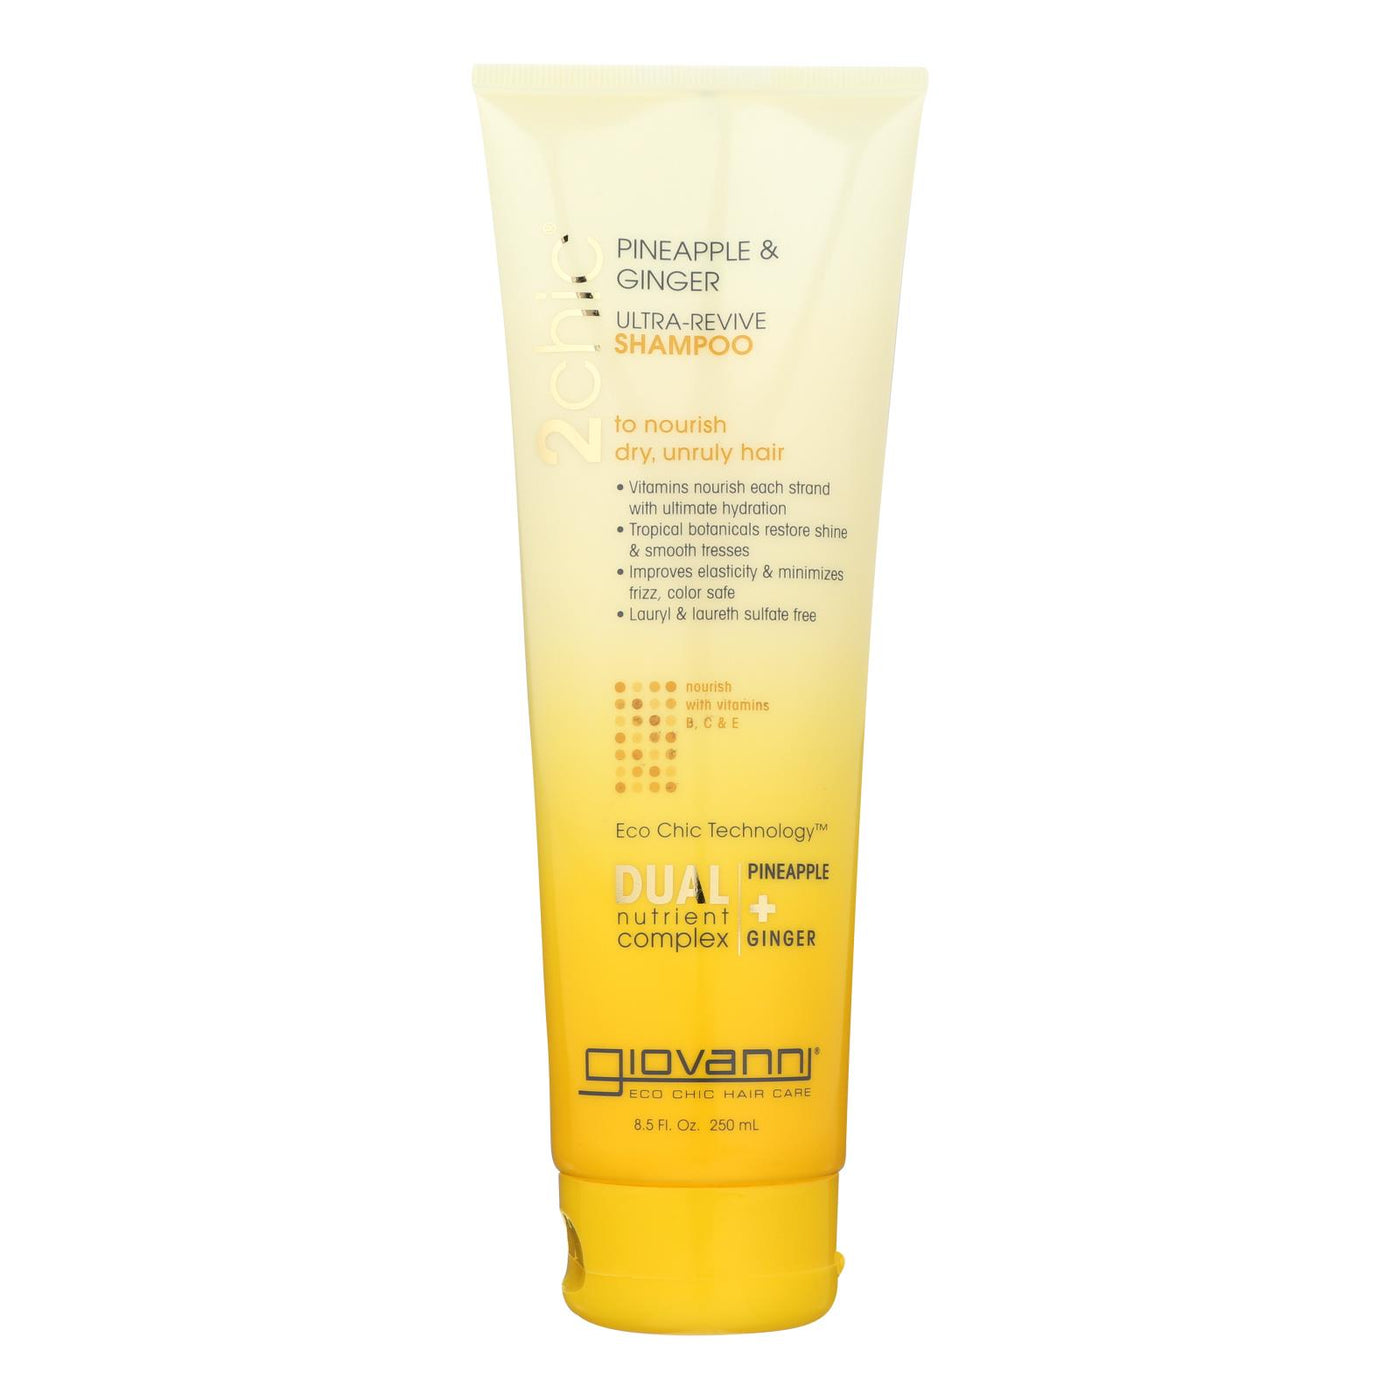 Giovanni Hair Care Products Shampoo - Pineapple And Ginger - Case Of 1 - 8.5 Oz. | OnlyNaturals.us